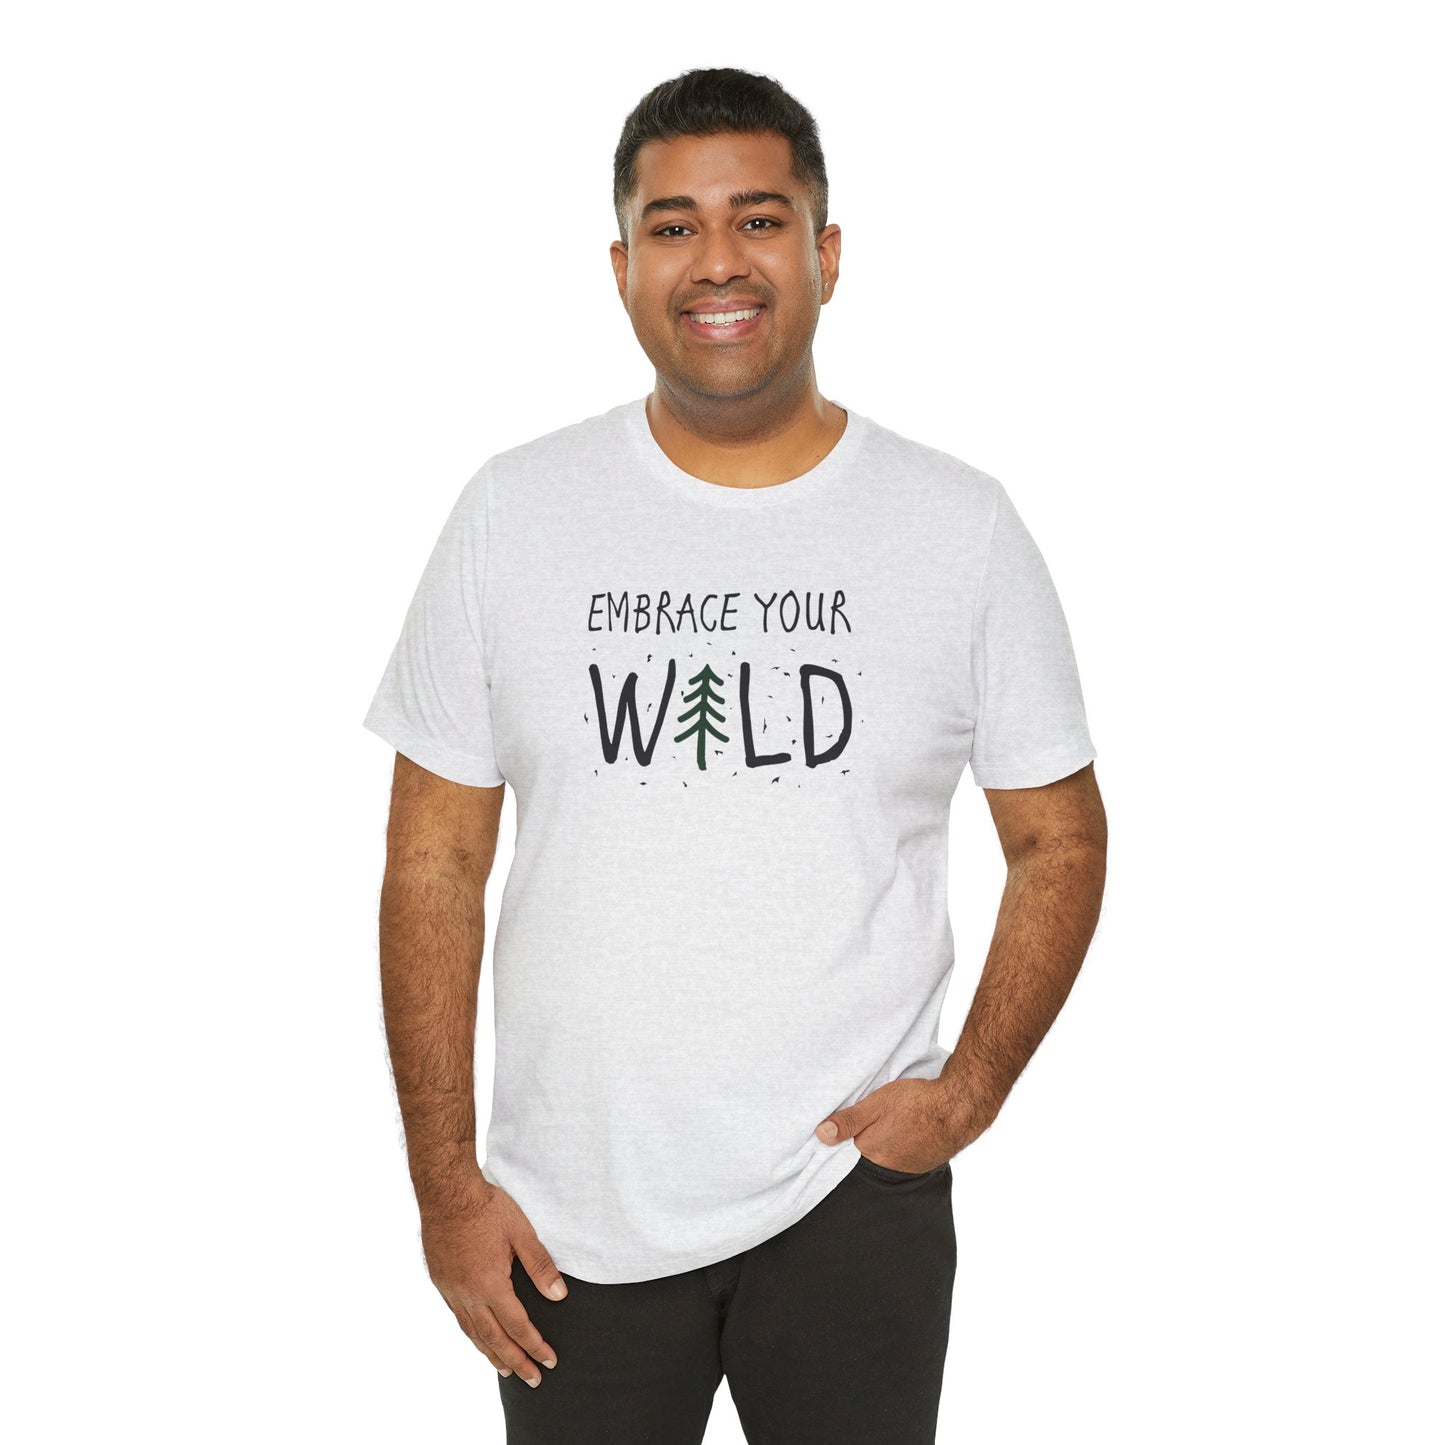 Embrace Your Wild T-Shirt, Outdoor Tee, Hiking T-Shirt, Camping T-Shirt, Pine Tree T-Shirt